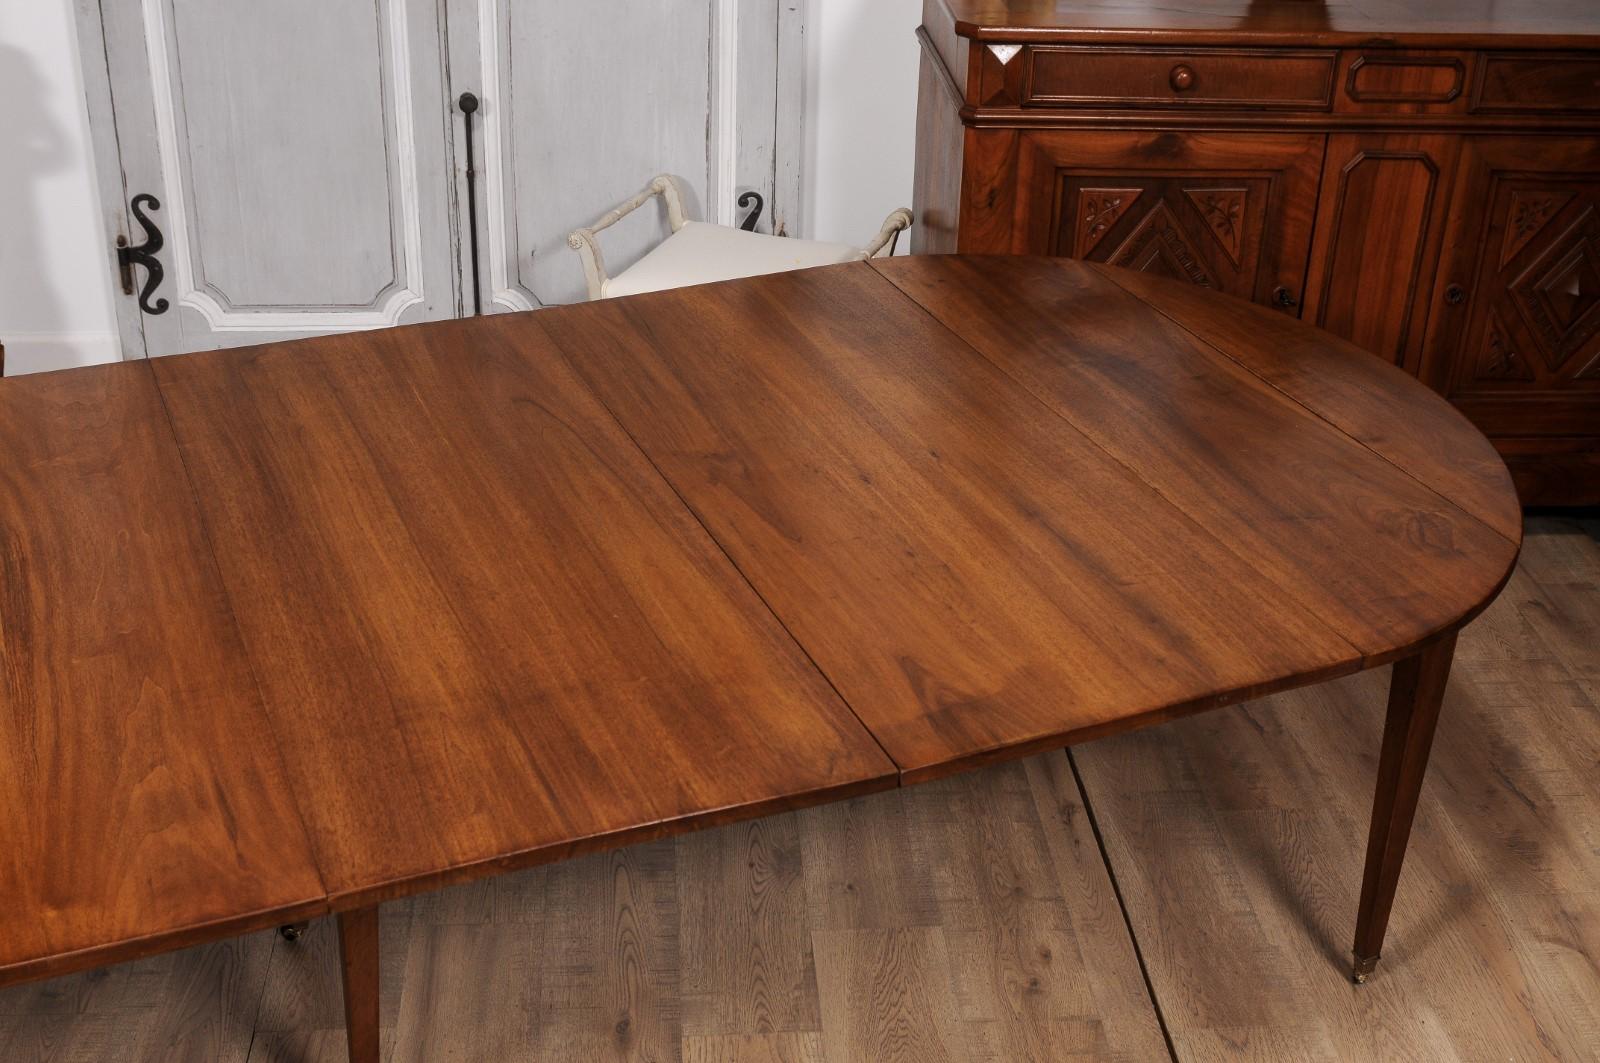 French Turn of the Century Extension Walnut Table With Five Leaves Circa 1900 For Sale 8